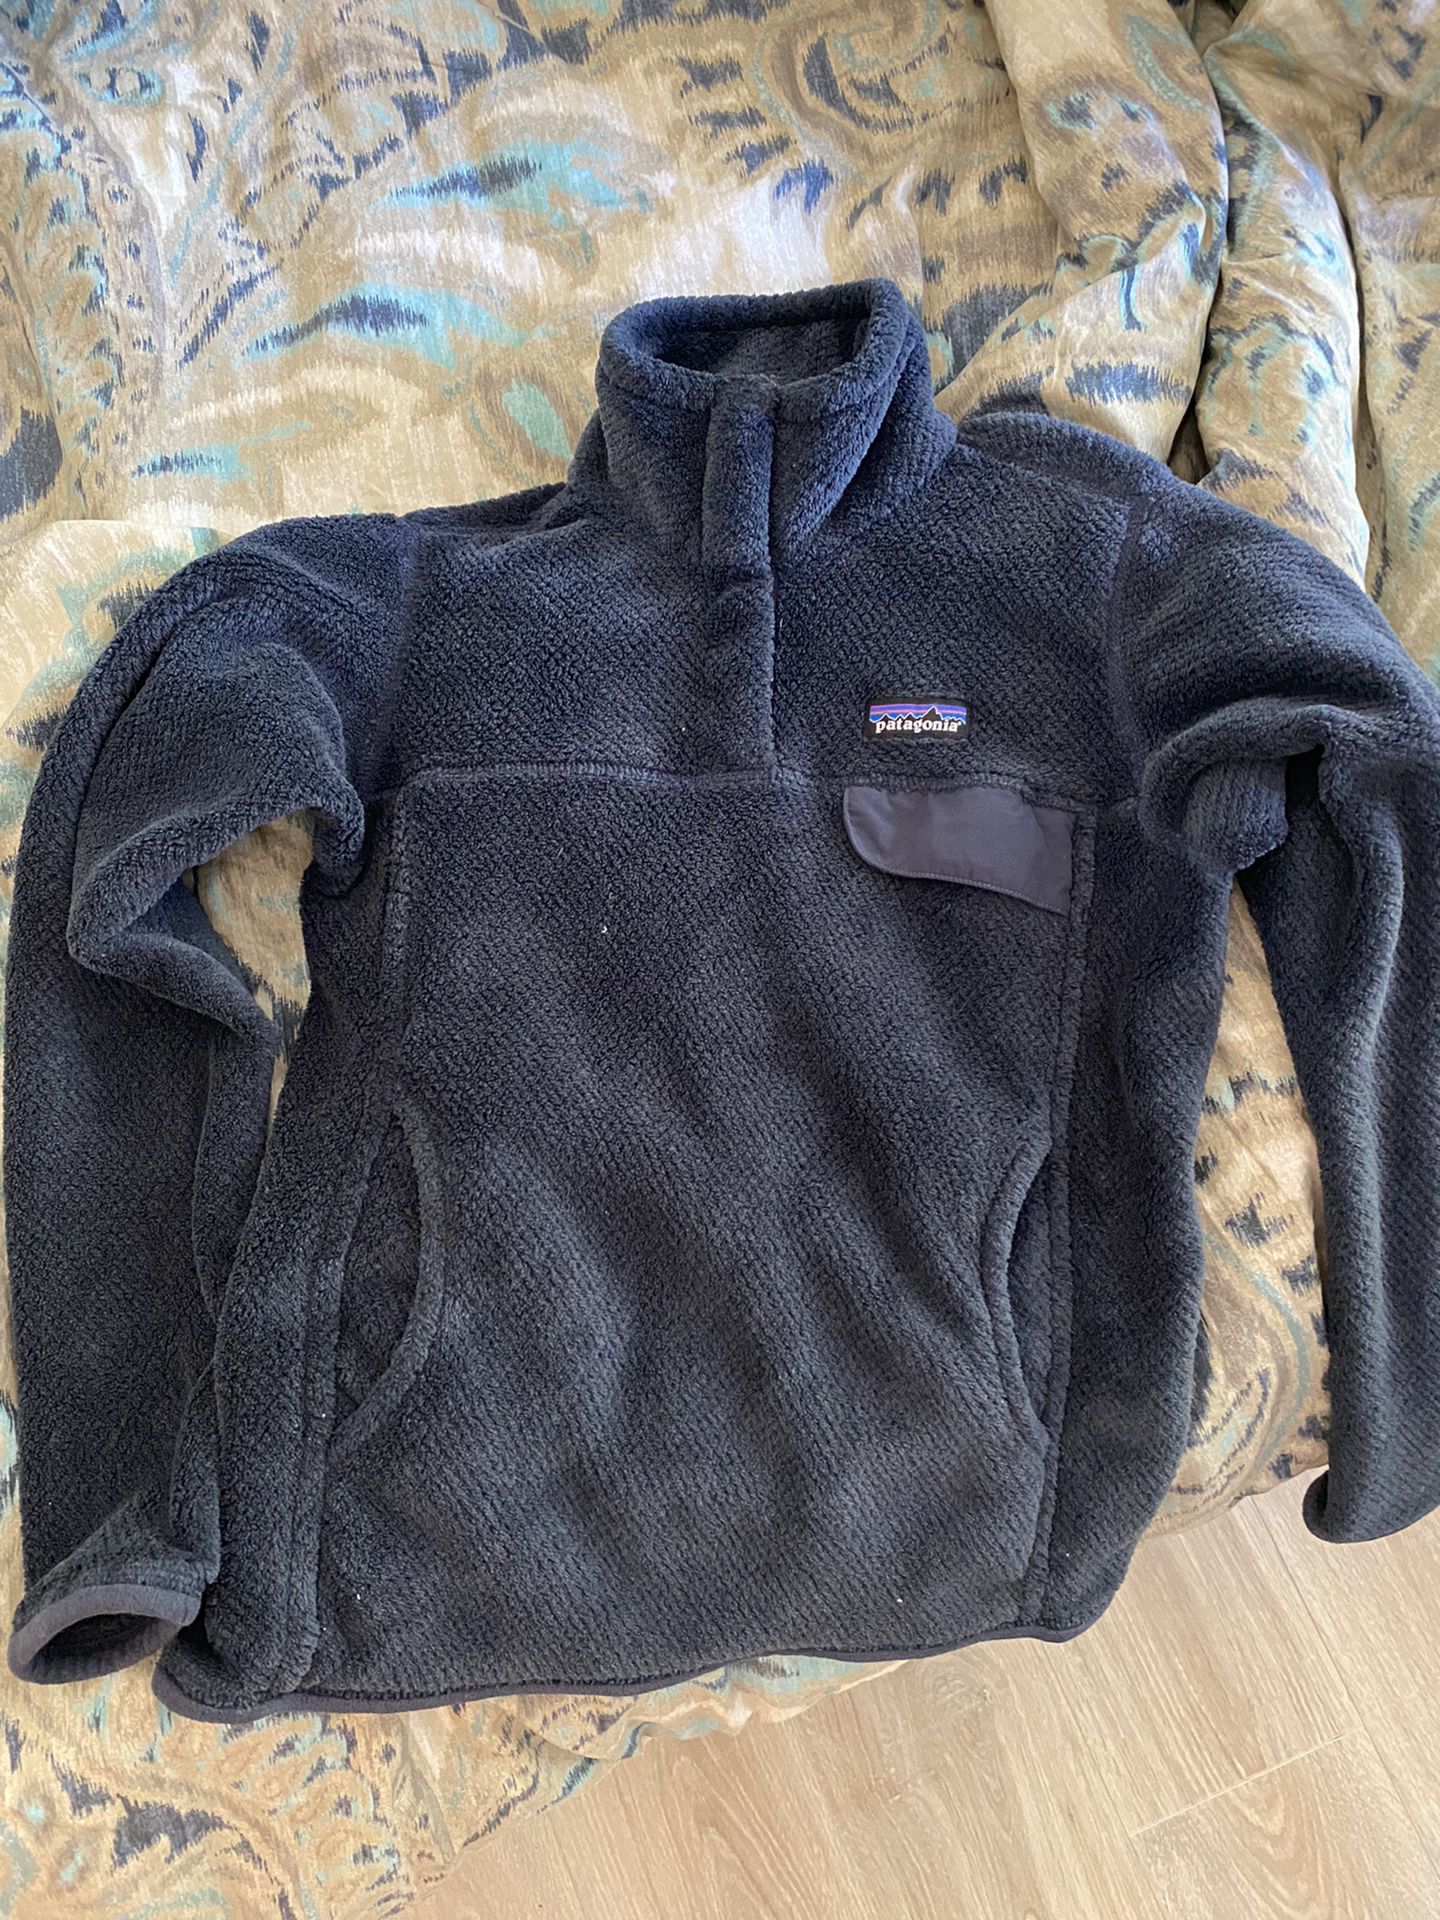 Patagonia pull over -S